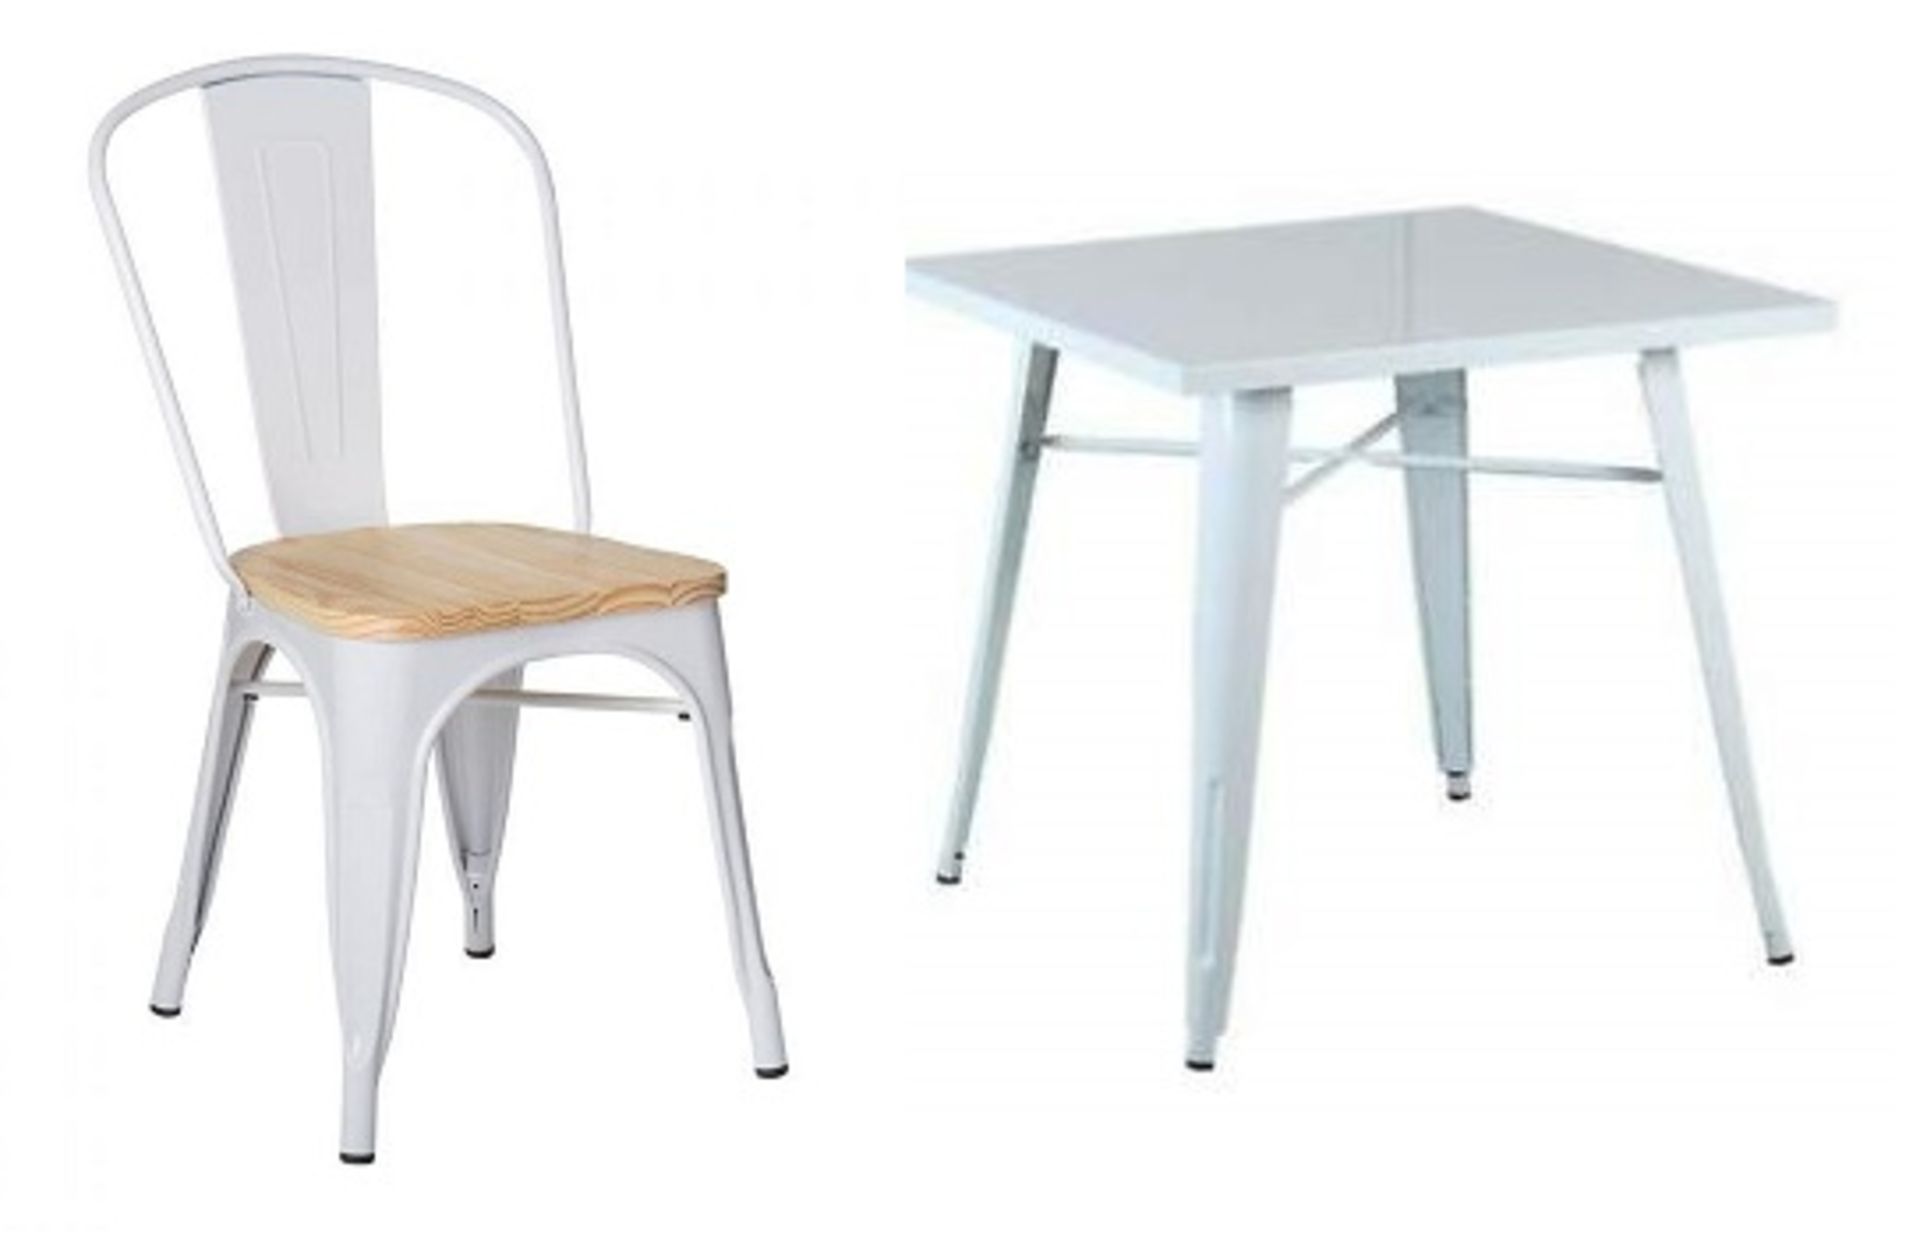 1 x Tolix Industrial Style Outdoor Bistro Table and Chair Set in White- Includes 1 x Table and 4 x